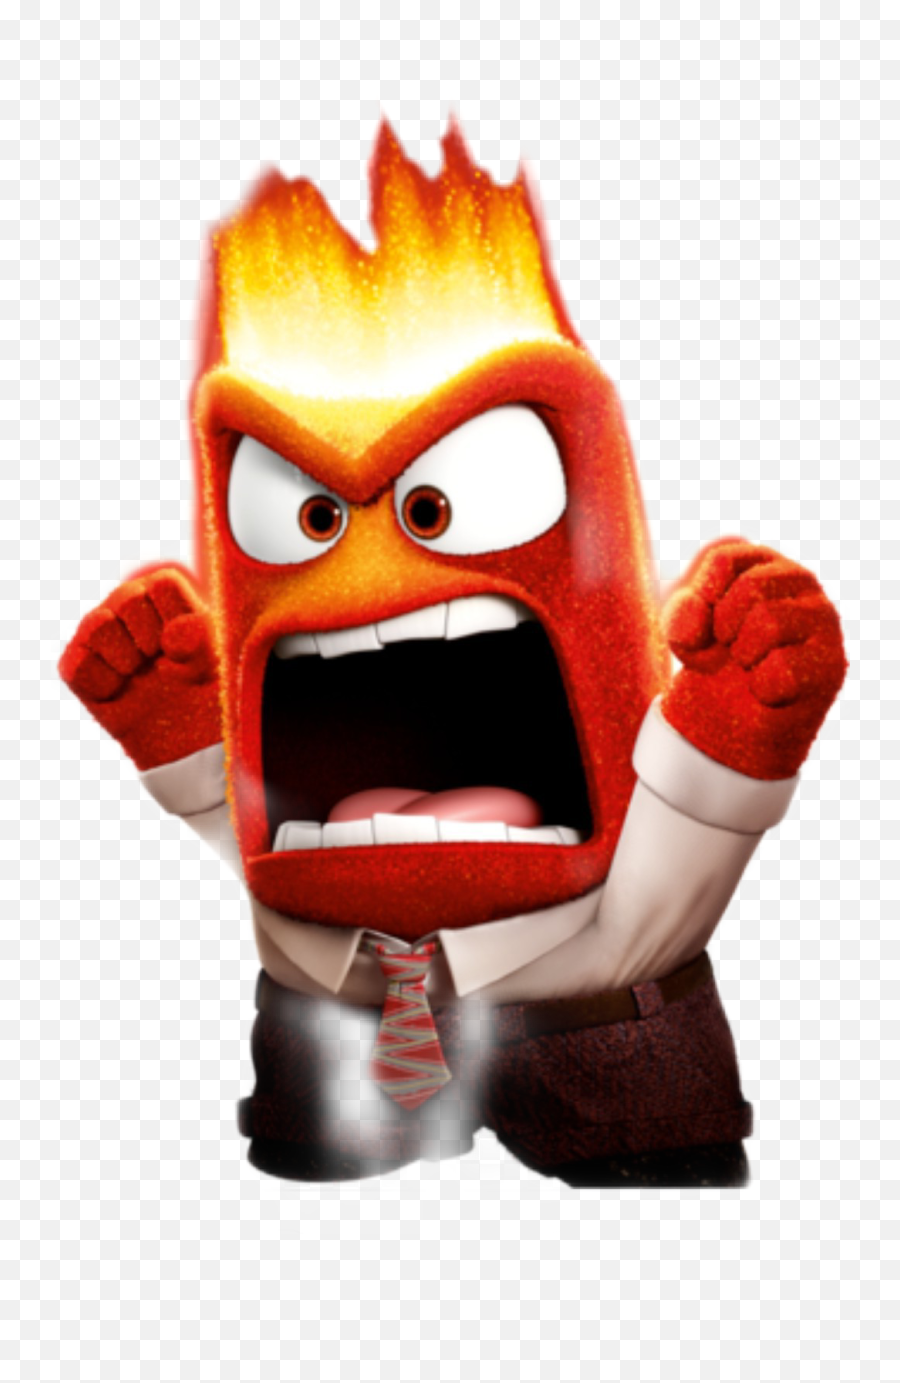 Angry Emoji Sticker By Carazmatic - Anger Inside Out,Anger Emoji